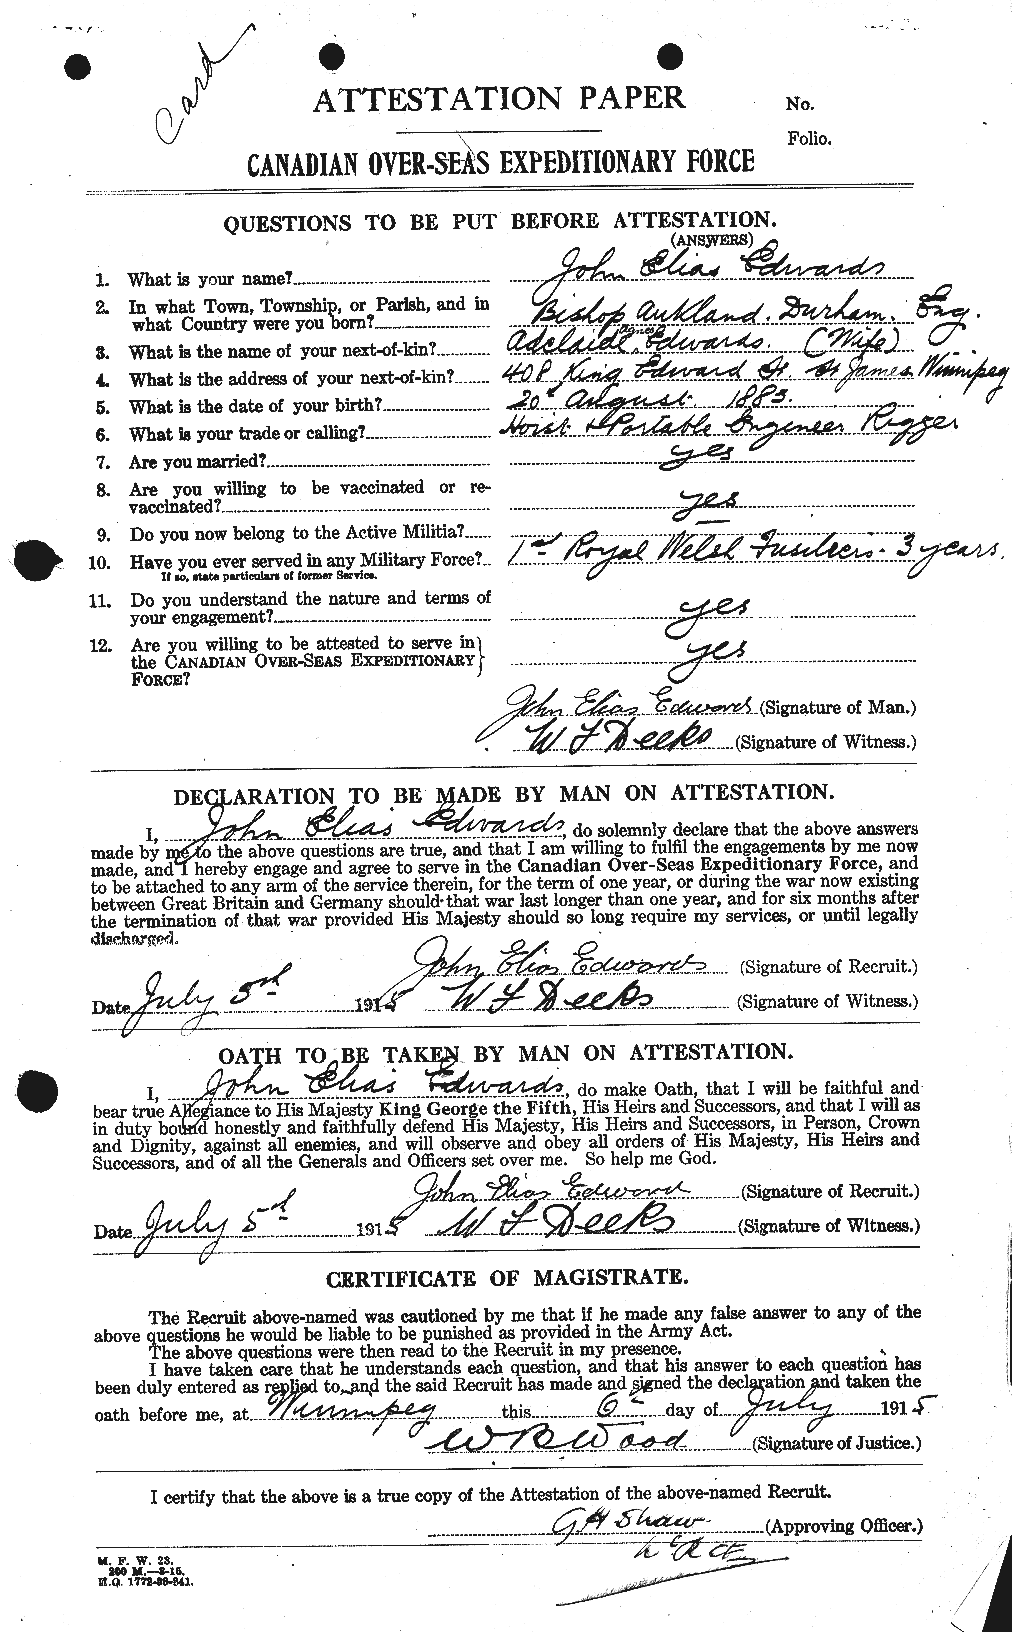 Personnel Records of the First World War - CEF 310128a